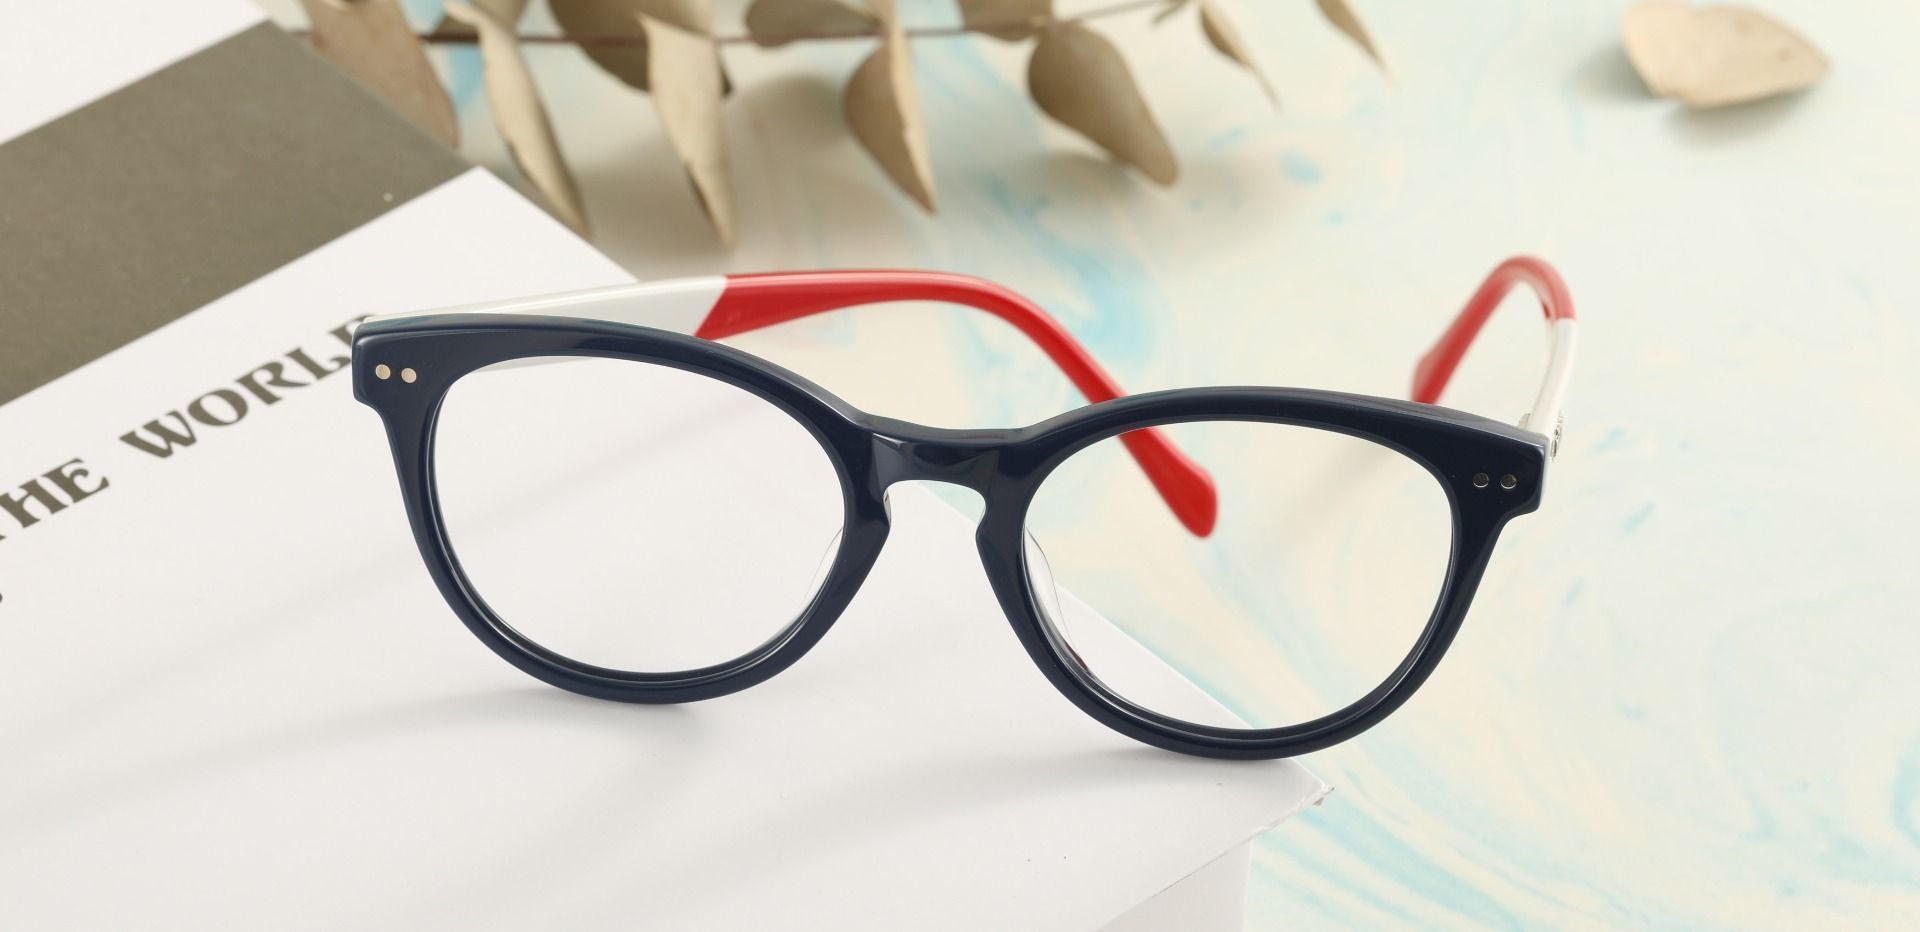 Revere Oval Lined Bifocal Glasses - The Frame Is Blue And Red